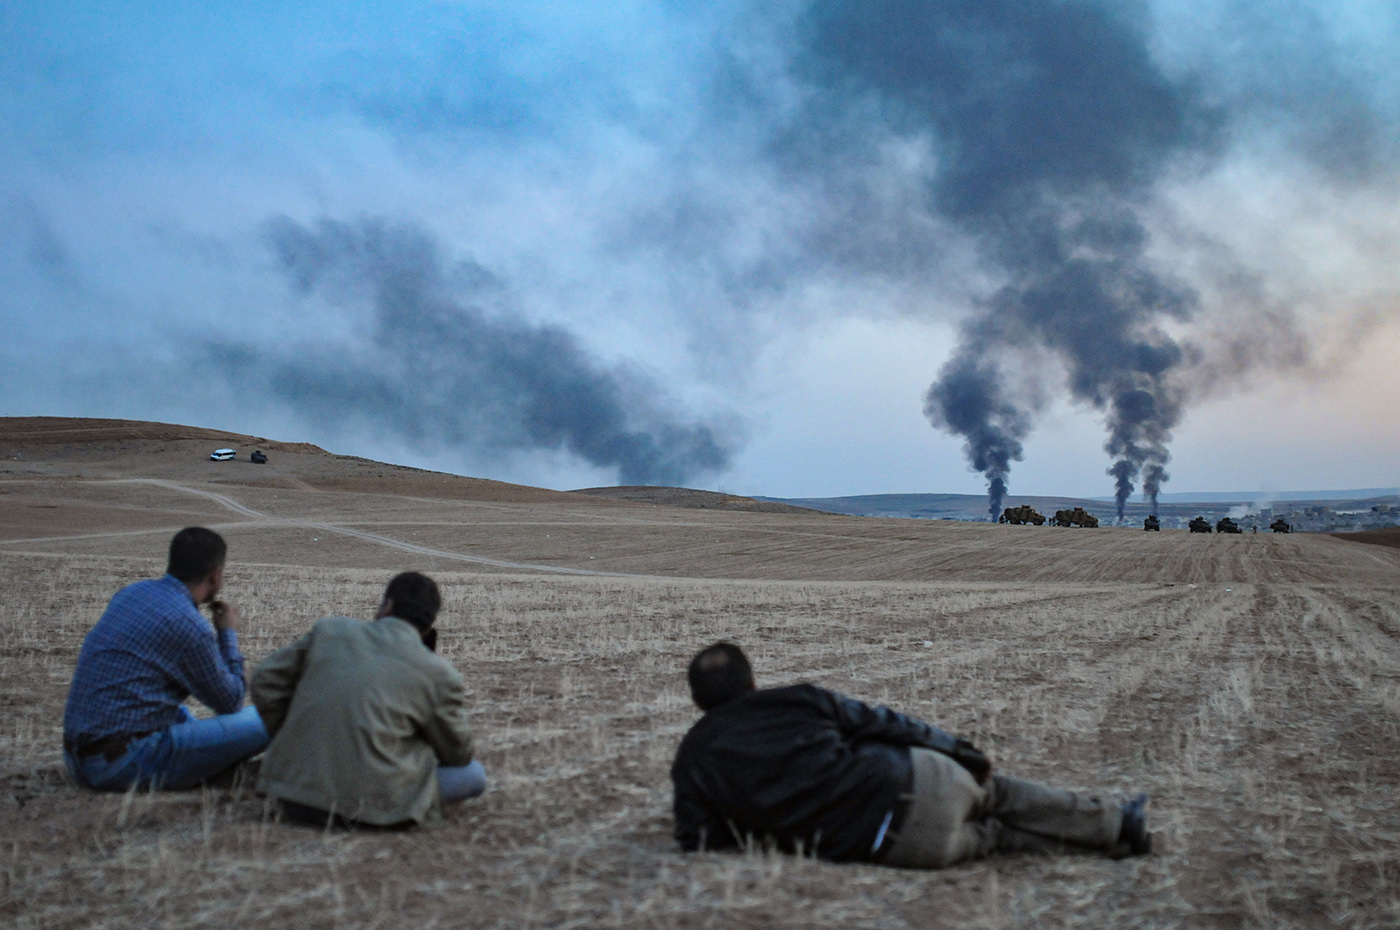 People look at smoke rising from an explosion following a US-led coalition airstrike on Kobane, Syria, as seen from the Turkish side of the border, near Suruc district, Sanliurfa, Turkey, 26 October